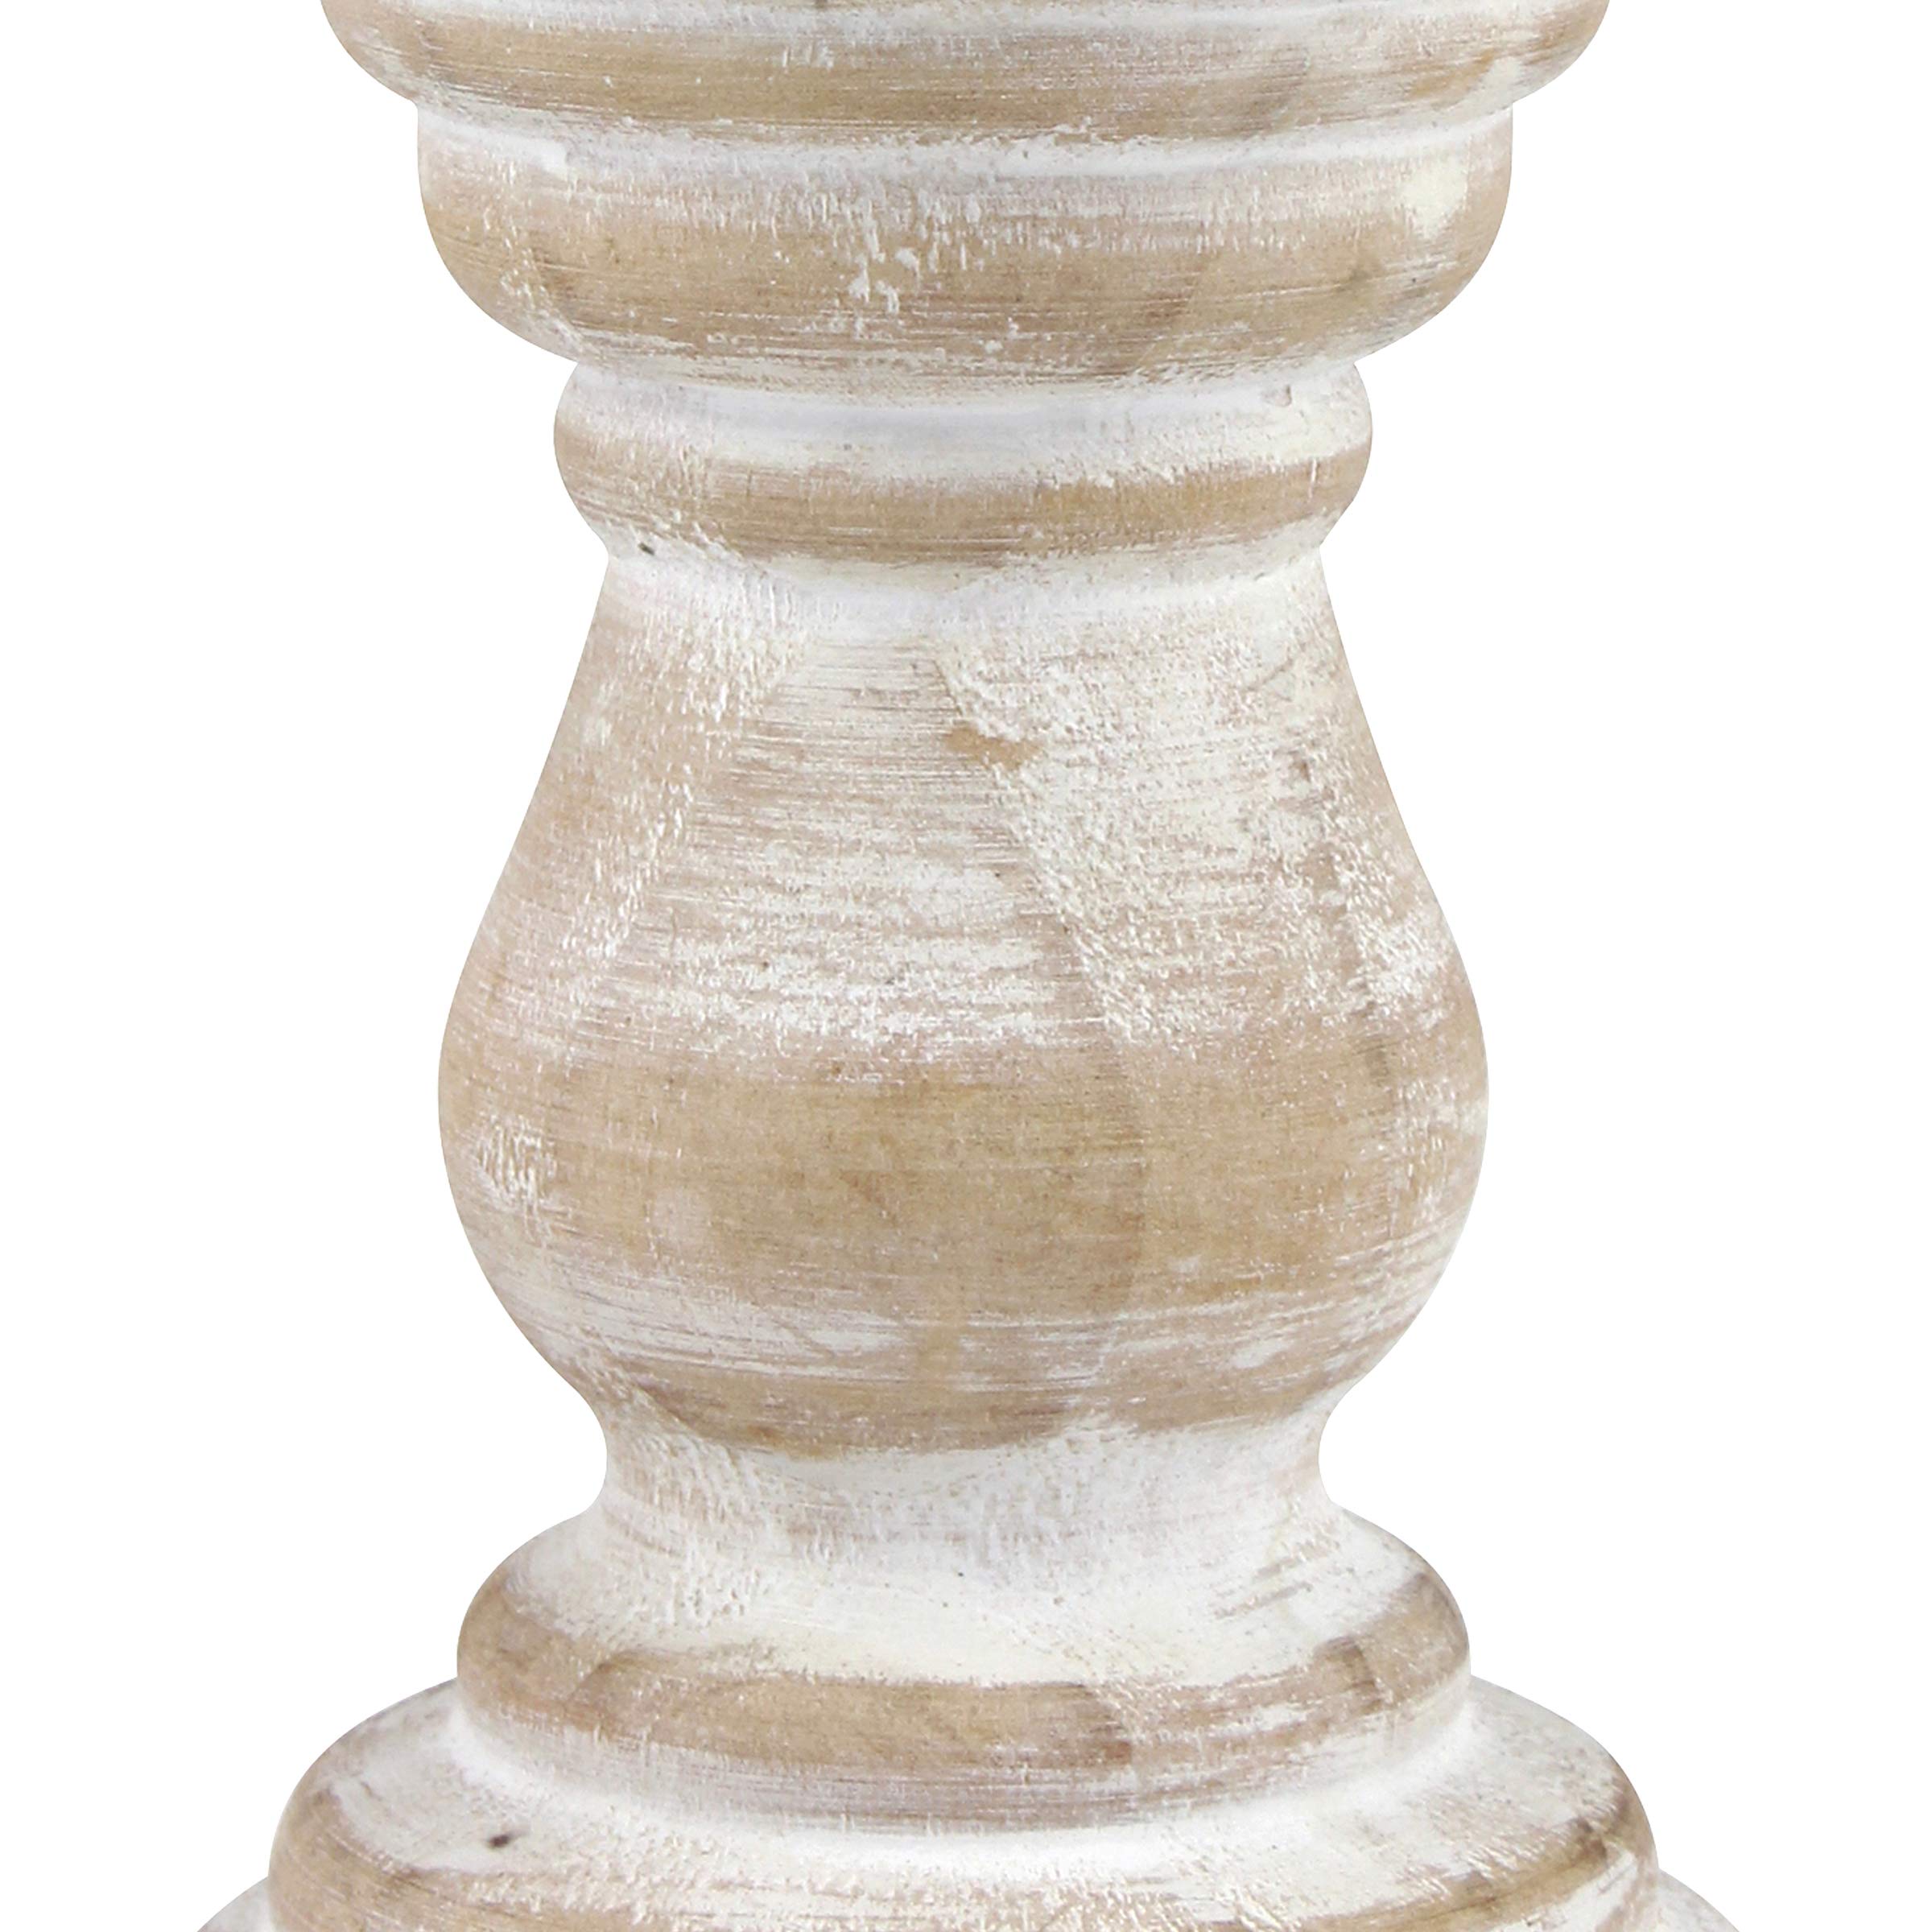 Stonebriar Antique White Wooden Pillar Candle Holder, Vintage Seaside Pillar Stand for Dining Table Centerpiece, Coffee Table, Mantel, Or Any Table Top, Medium